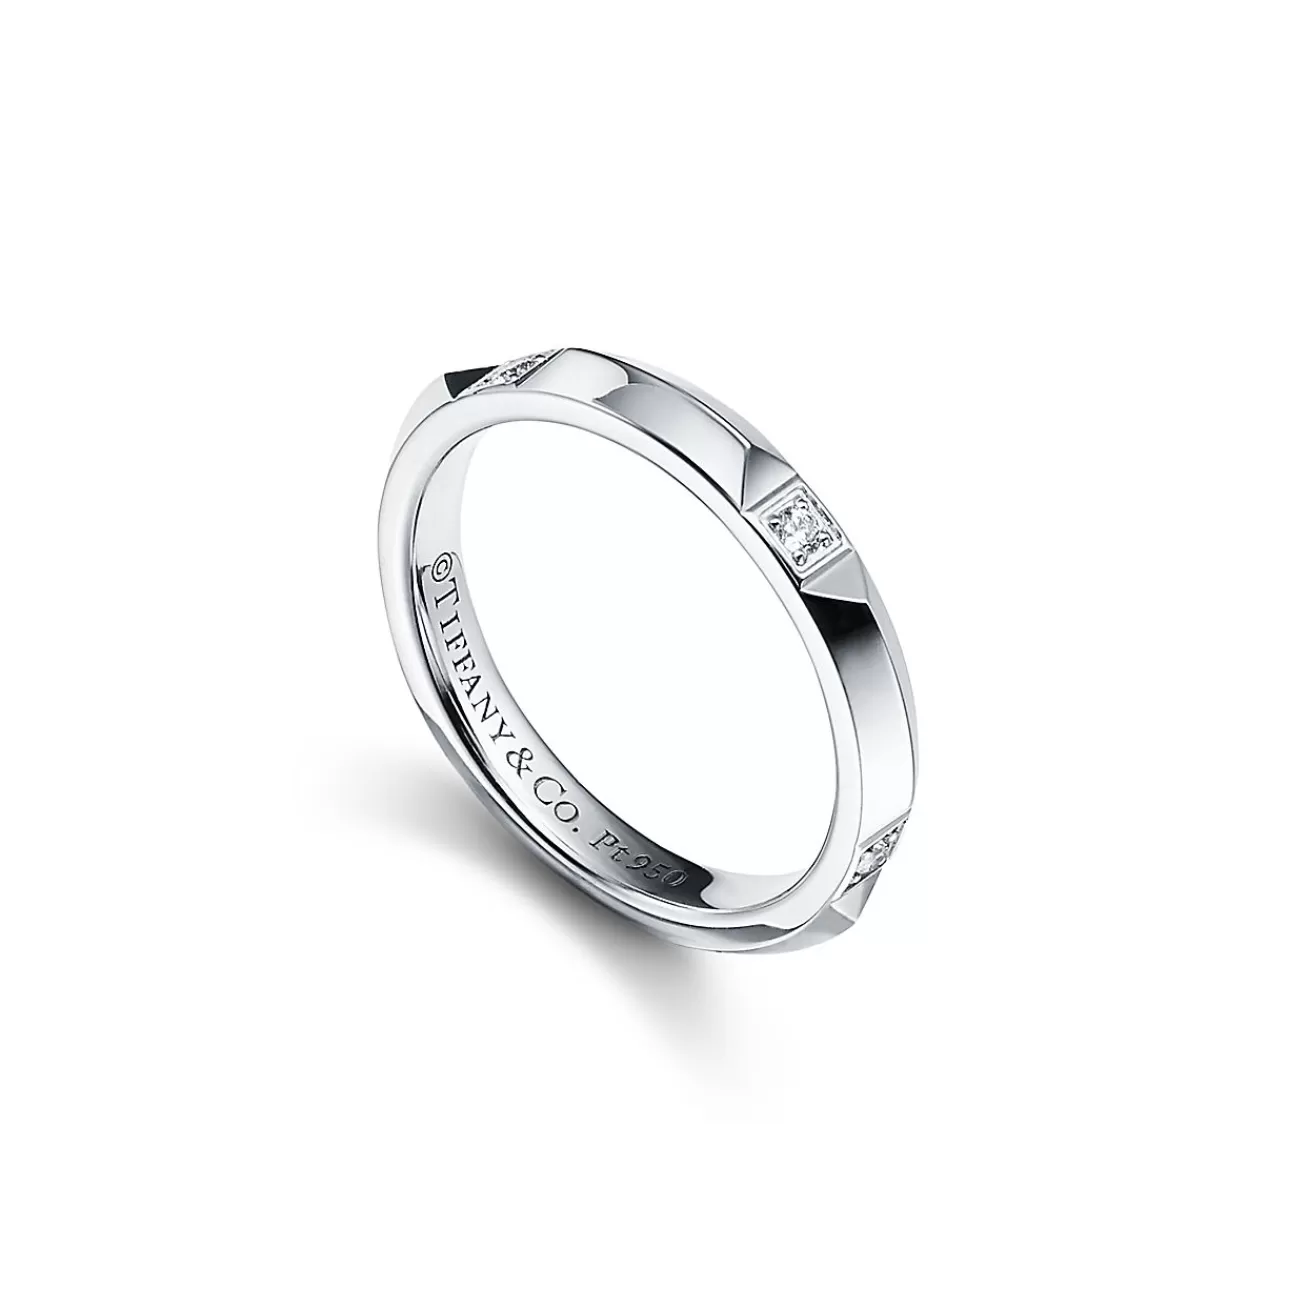 Tiffany & Co. Tiffany True® band ring in platinum with diamonds, 2.5 mm wide. | ^Women Rings | Men's Jewelry